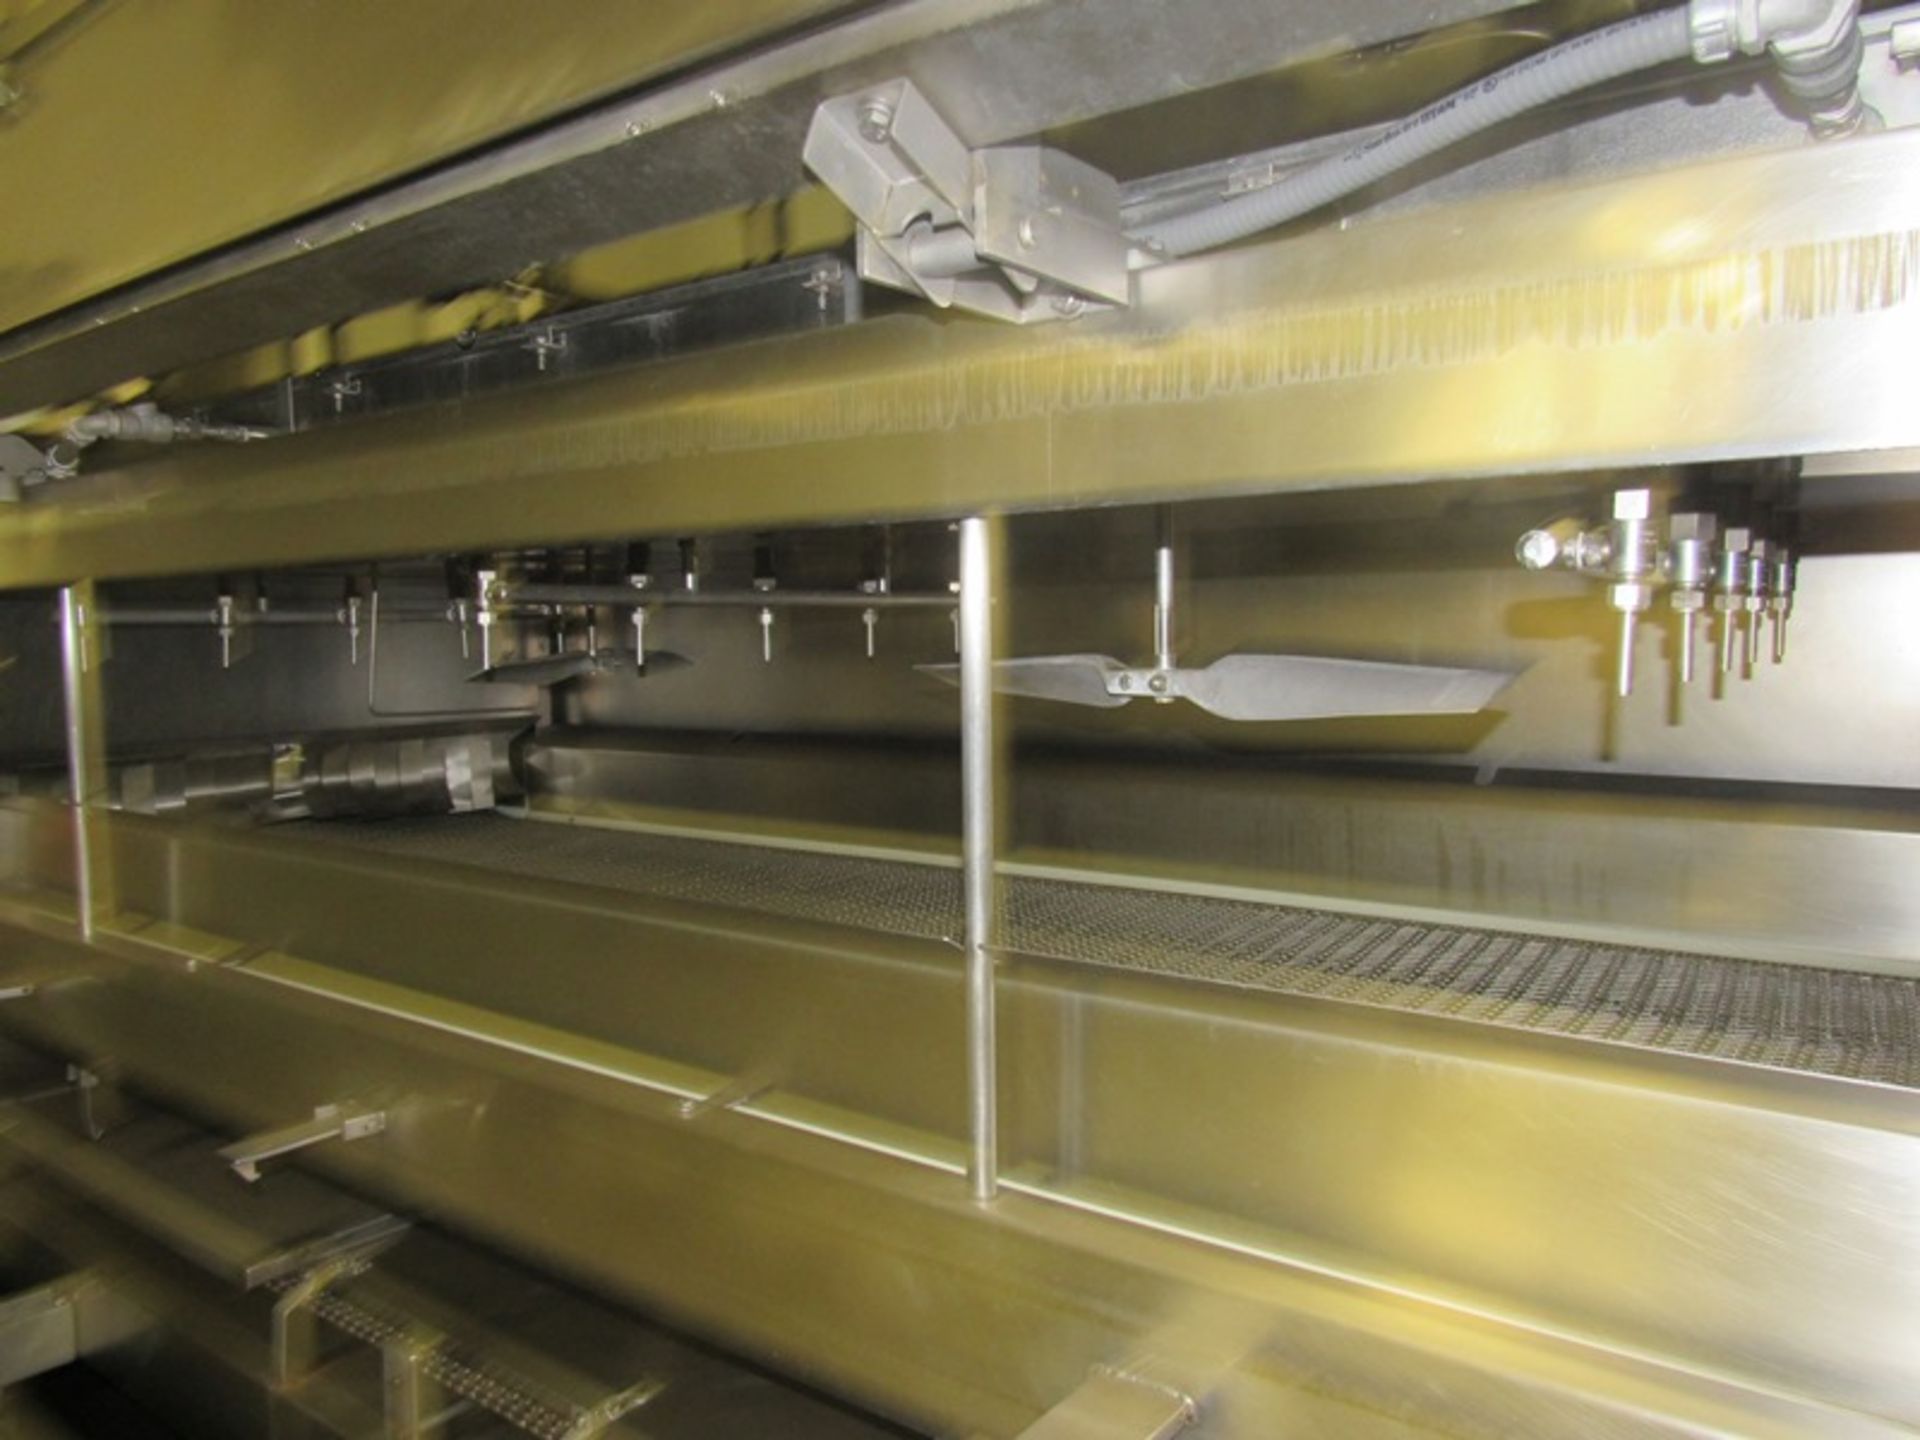 Praxair Cold Front Stainless Steel CO2 Straight Tunnel Freezer, (3) 9' long sections with 42" Wide X - Image 5 of 12